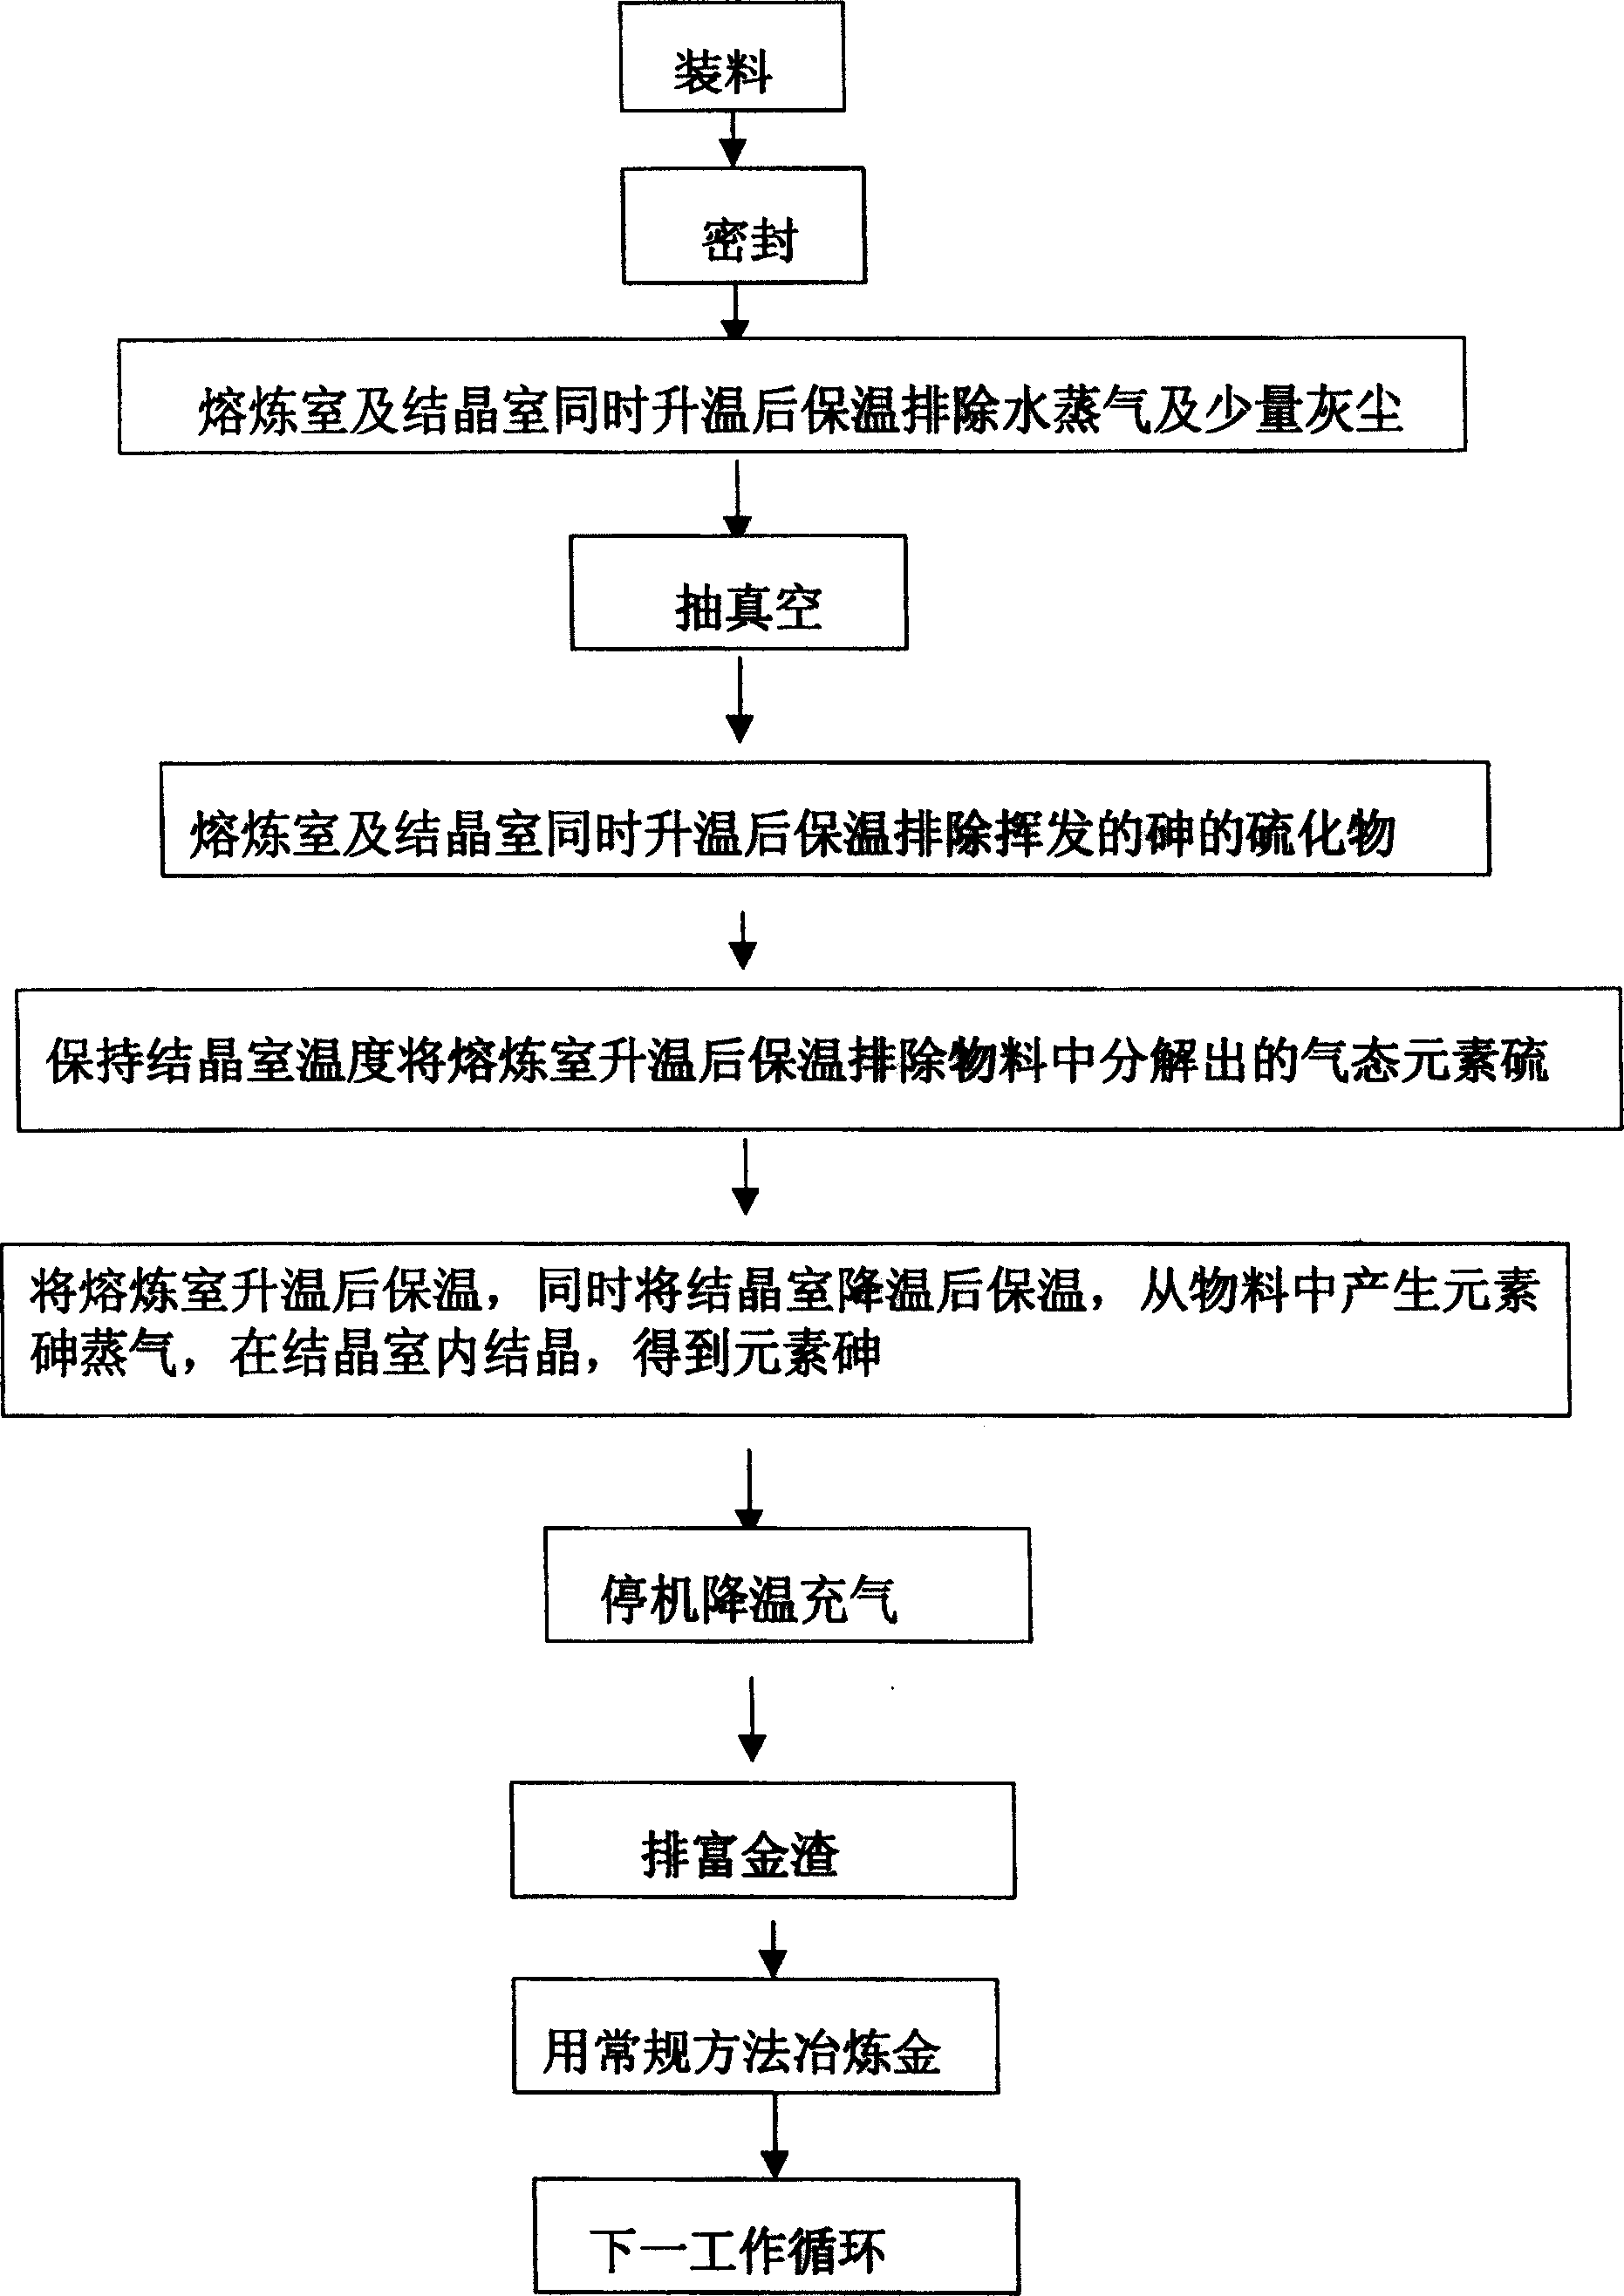 Method and system for extracting gold from arsenic contained headings